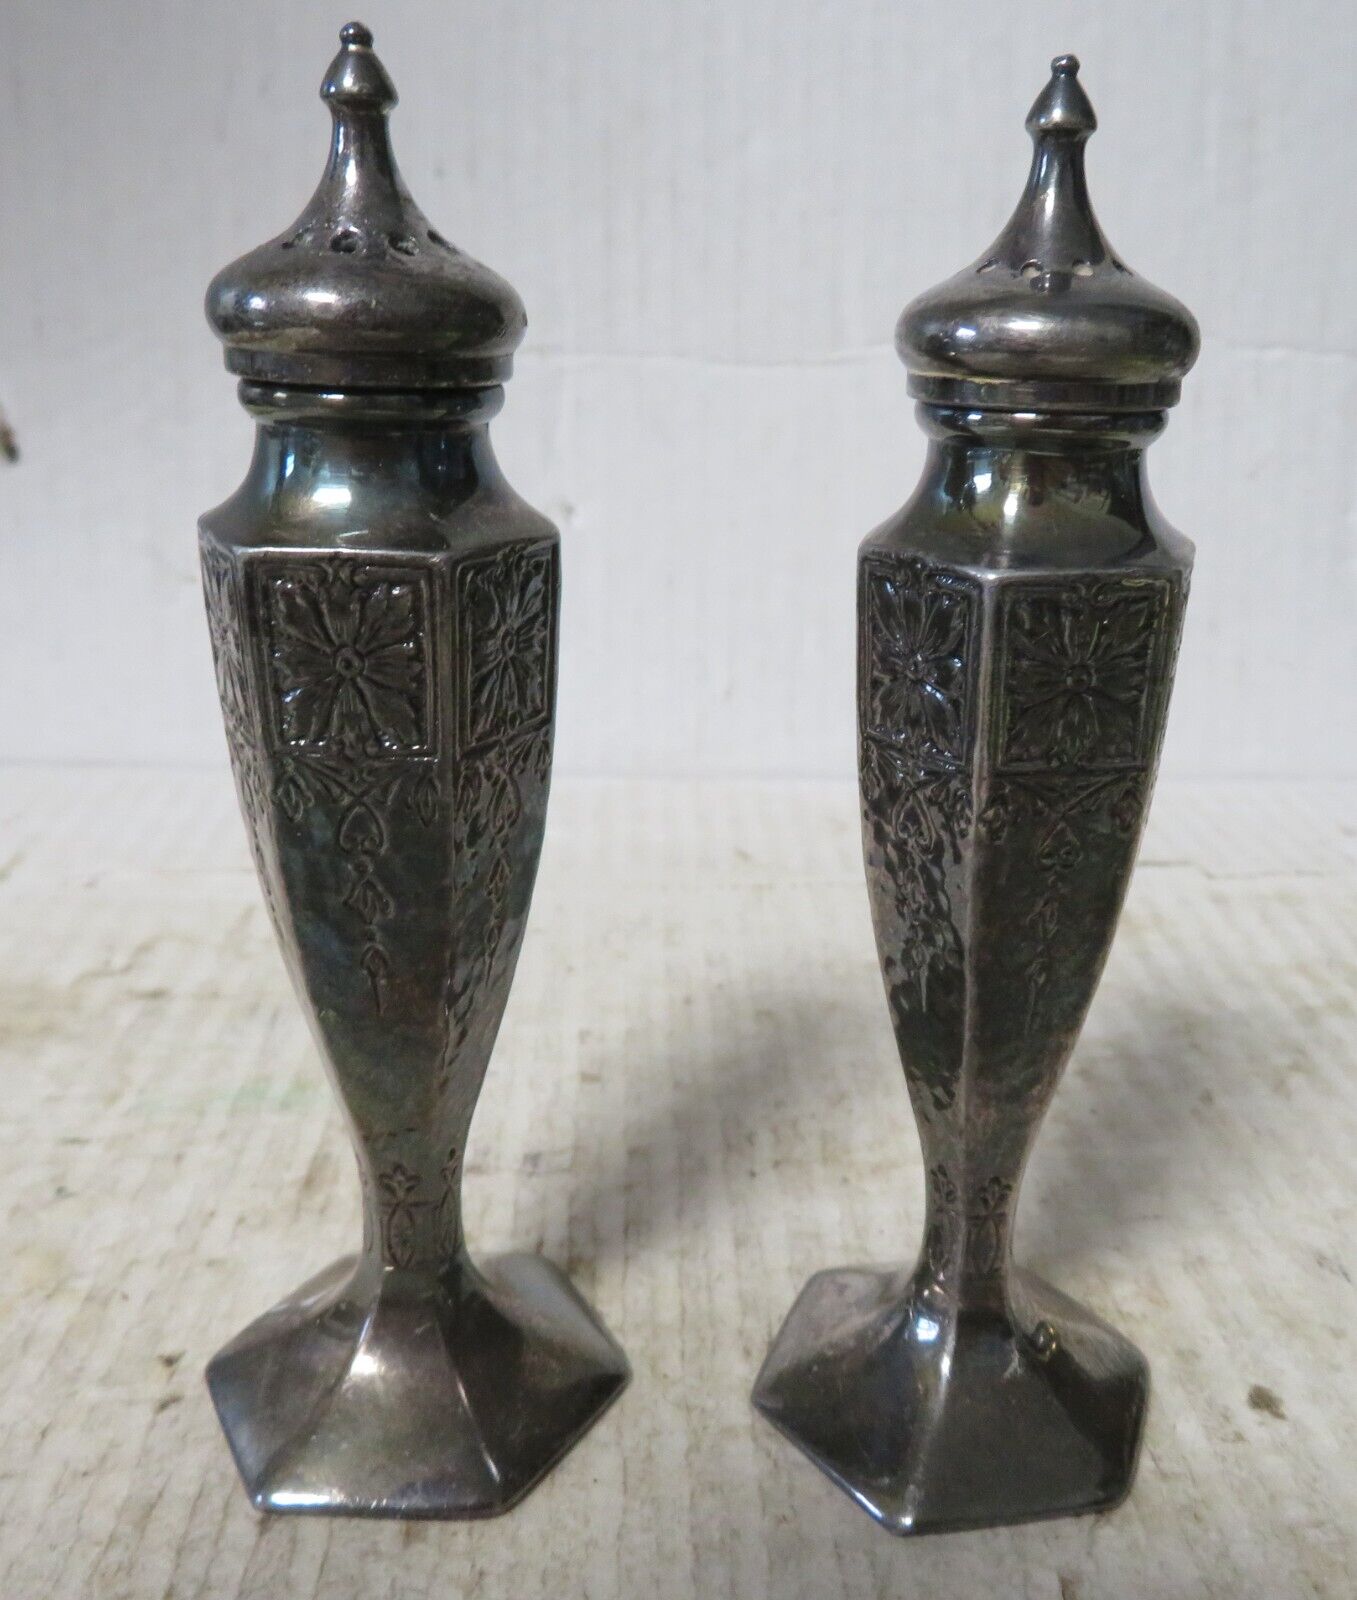 Vintage Weidlich Bros WB Mfg Co Silver Plated Salt and Pepper Shakers 2880